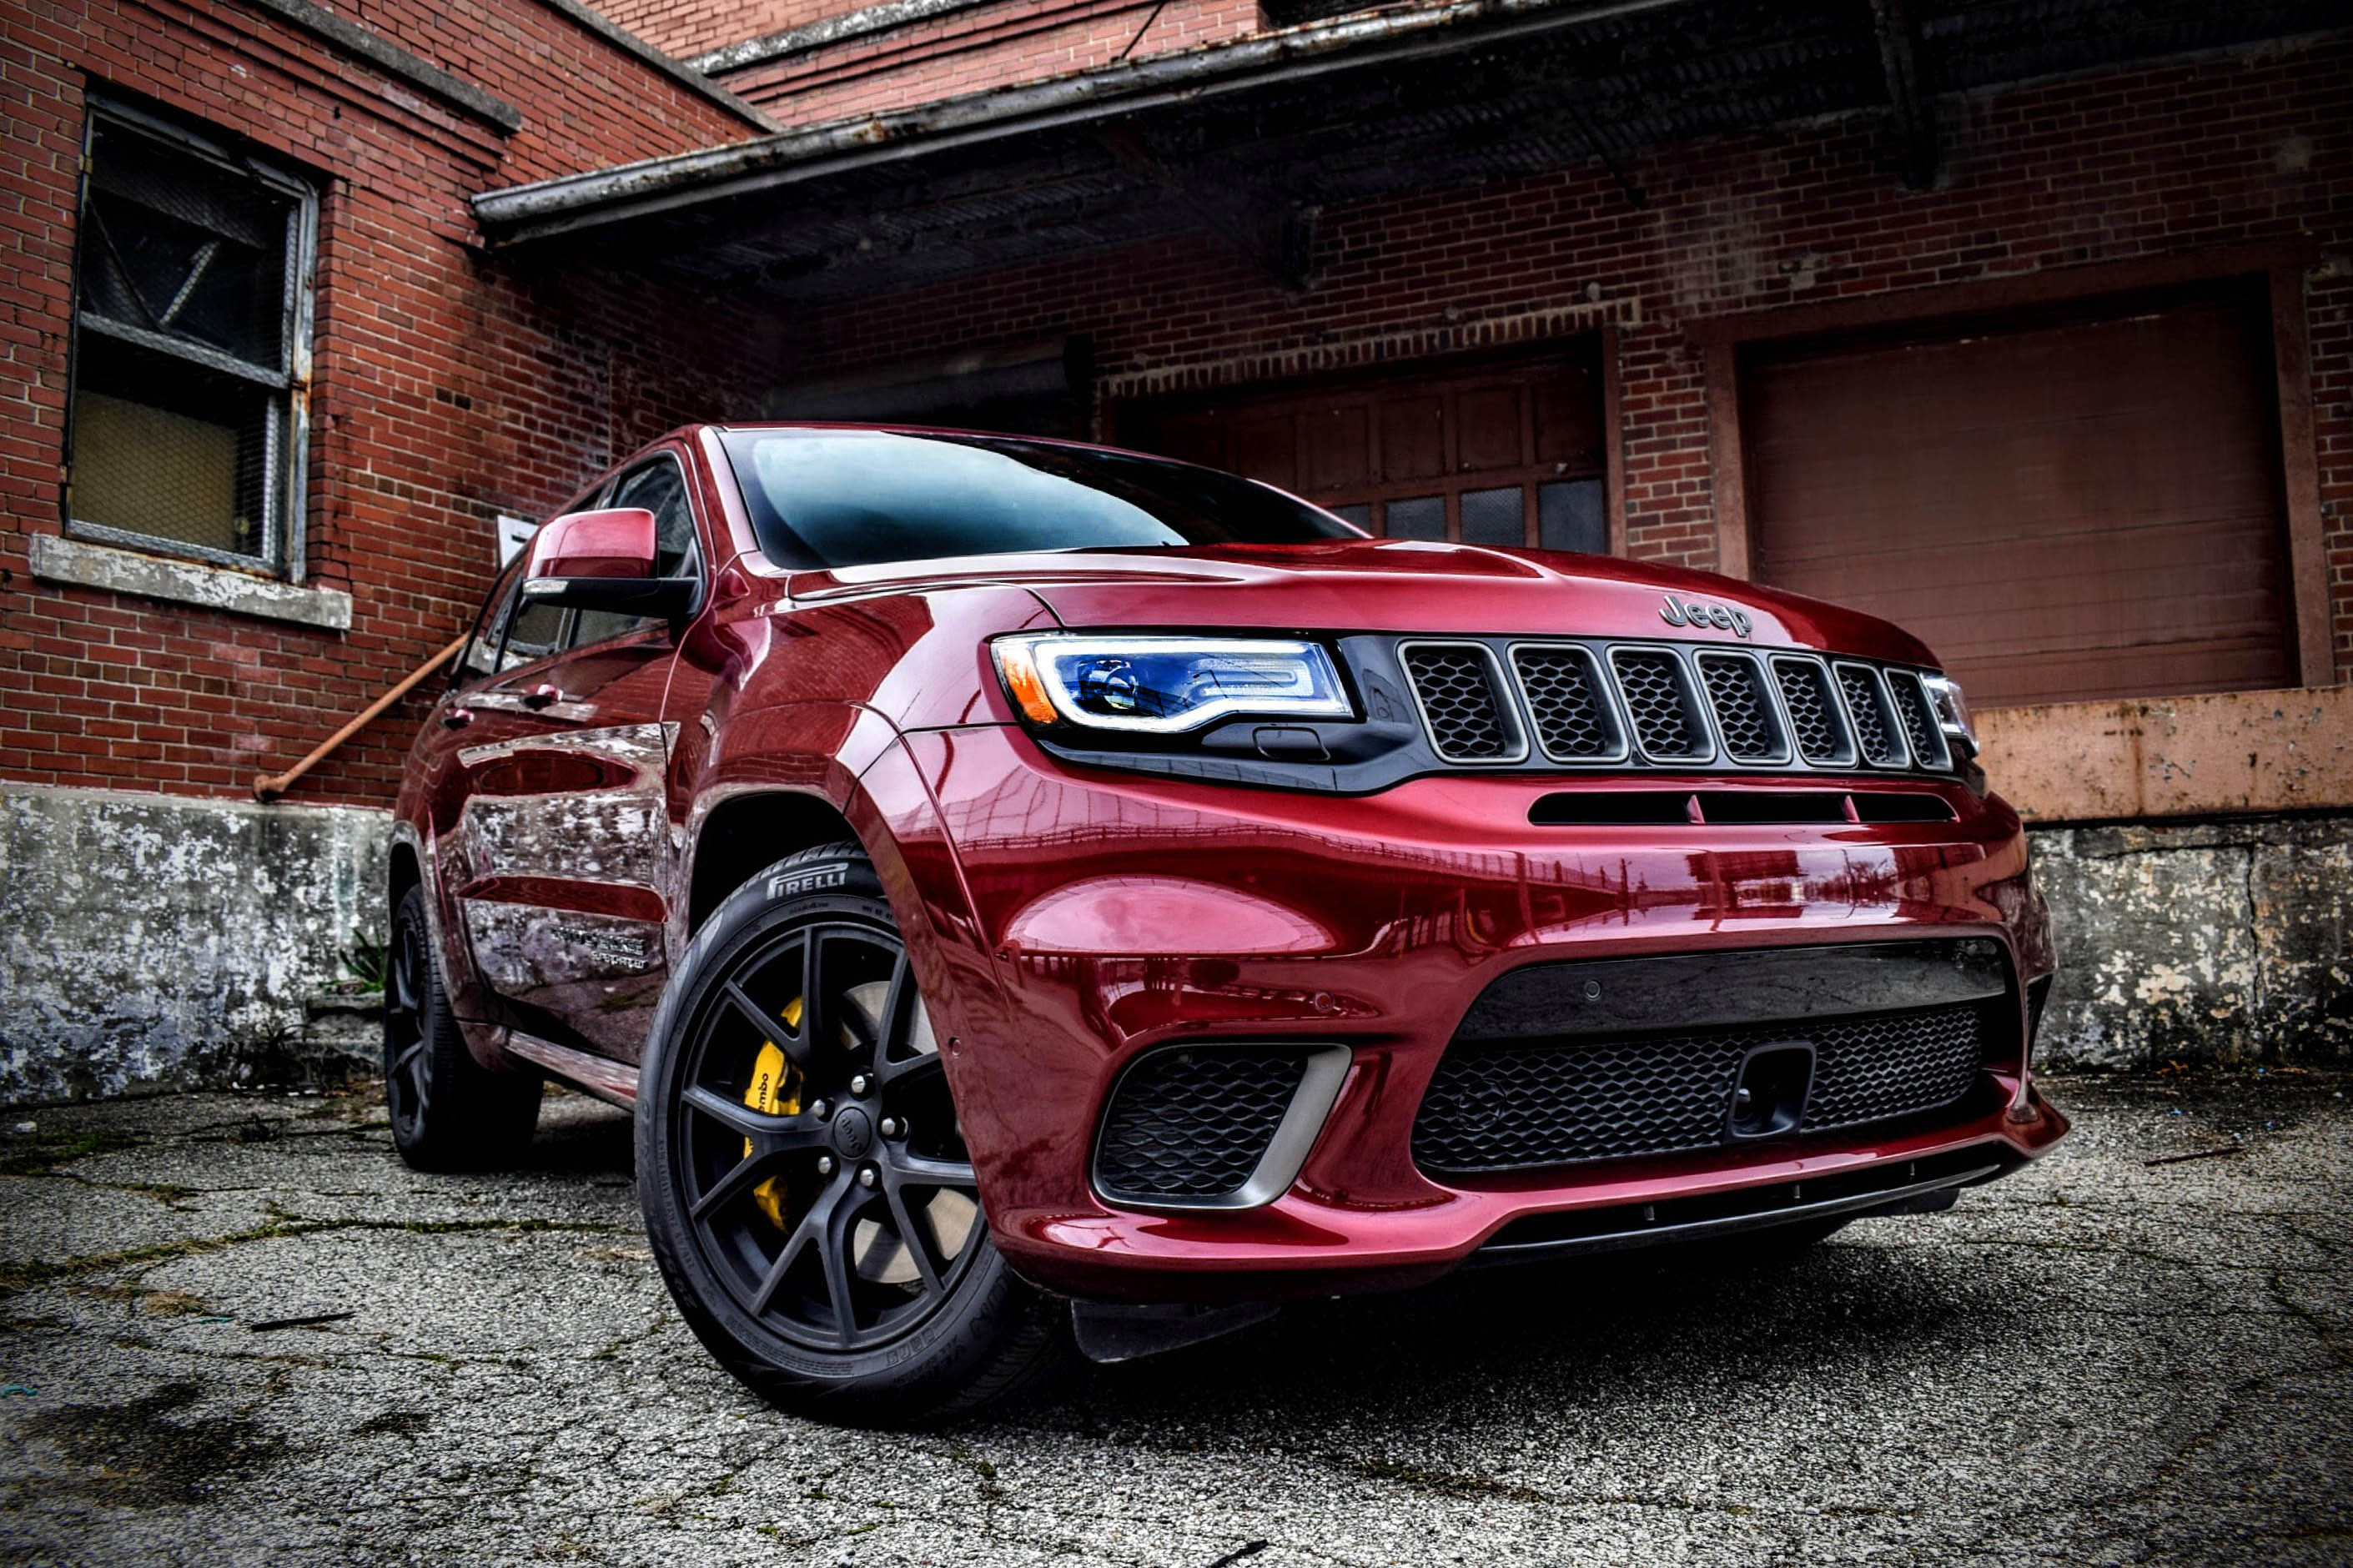 2019 Jeep Trackhawk Review: The Big Payback